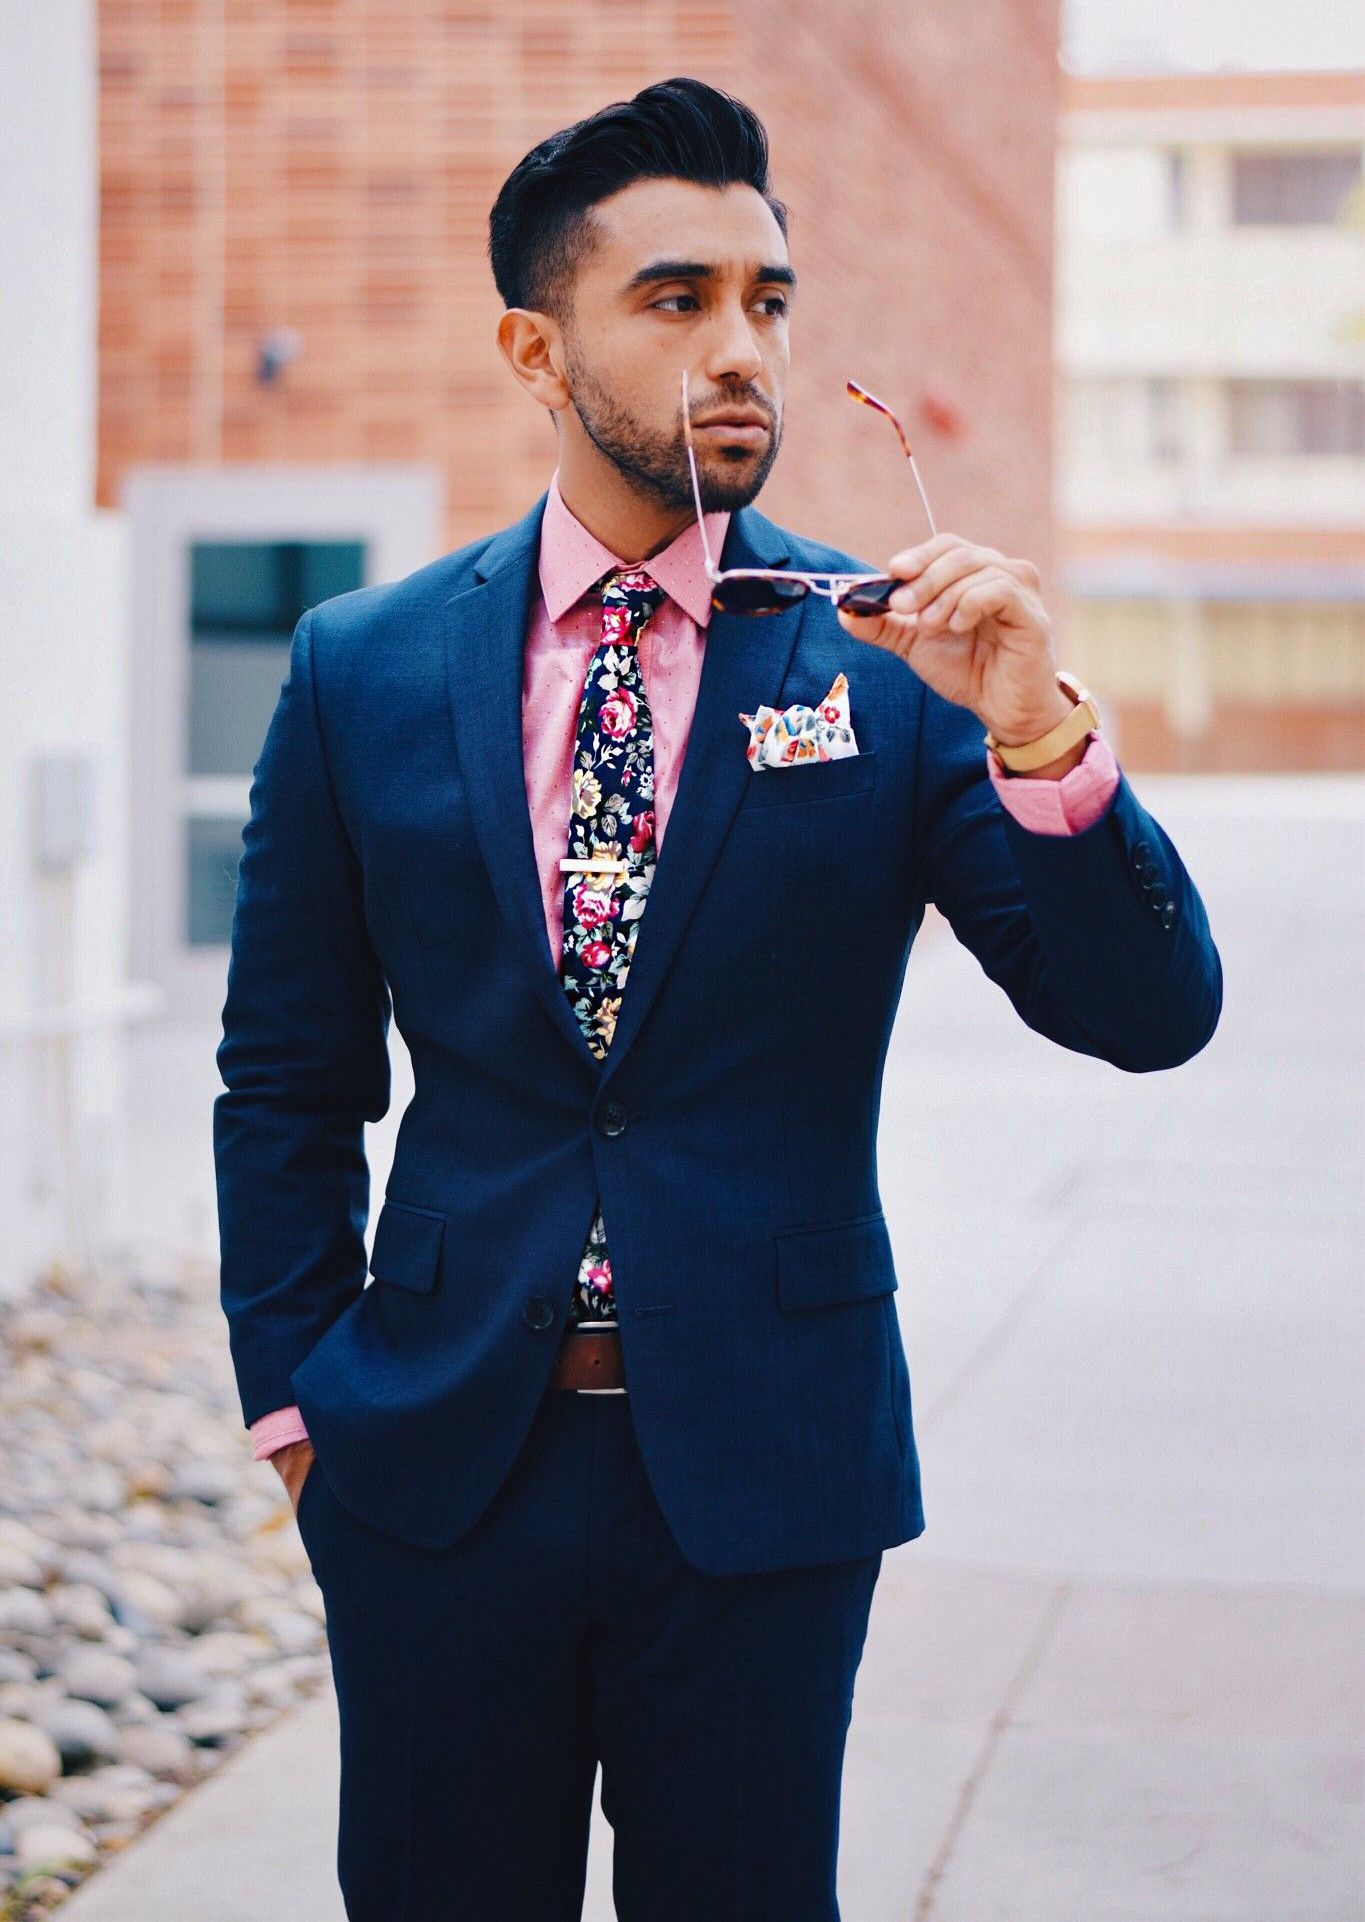 Navy suit, pink shirt, and navy/pink floral tie